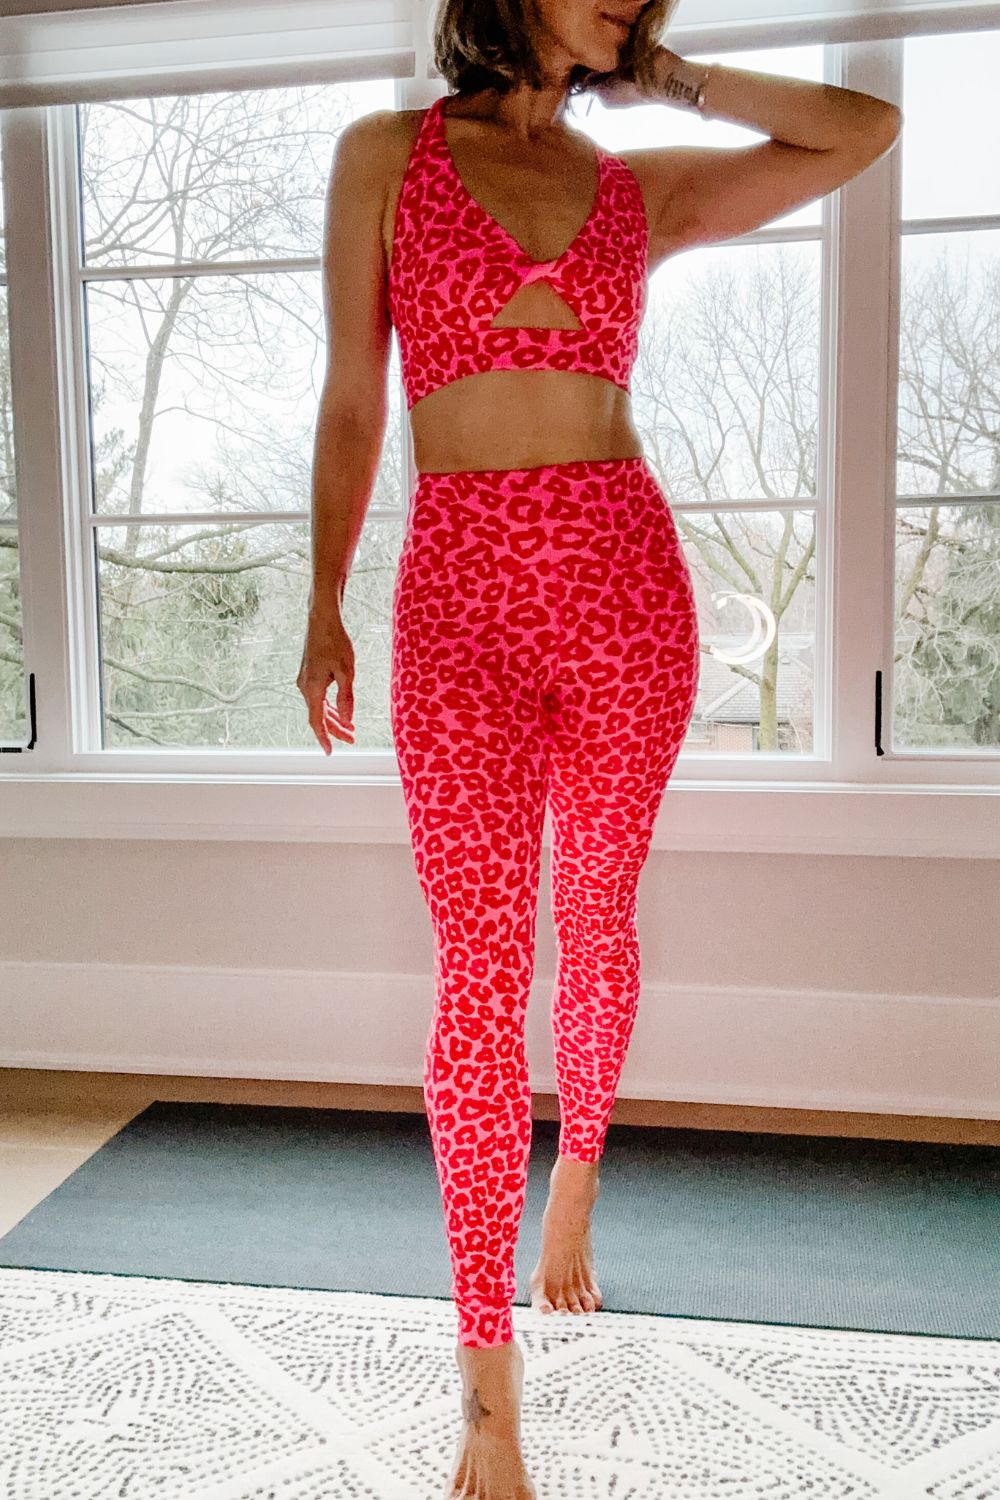 Suzanne wearing a pink leopard activewear set 